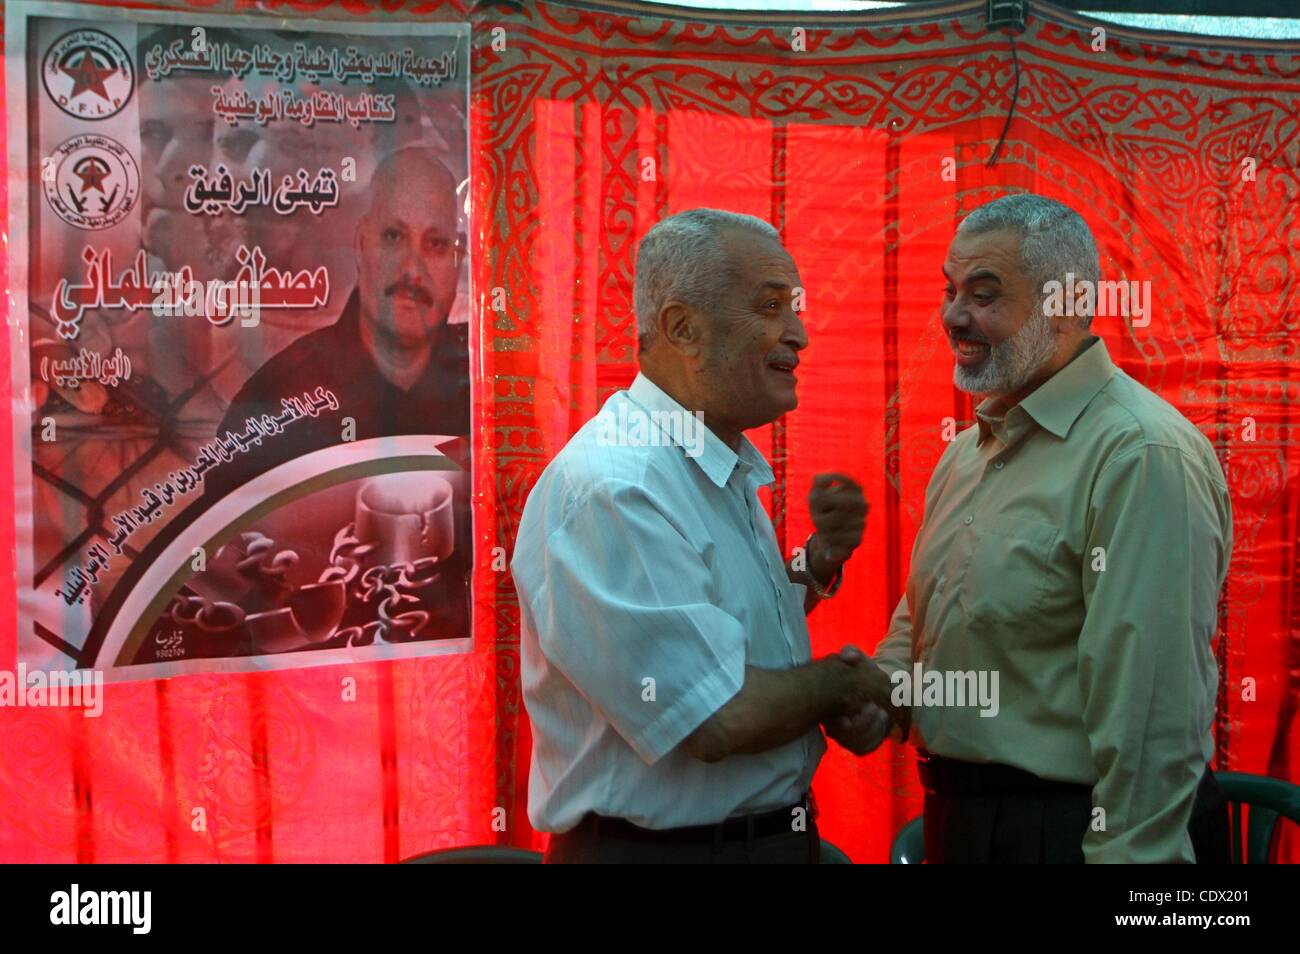 Oct. 19, 2011 - Gaza City, Gaza Strip, Palestinian Territory - Palestinian prime minister in Gaza Strip, Ismail Haniya visits the tent erected to welcome Palestinian prisoners released in exchange for the captured Israeli soldier Gilad Schalit in Gaza City, Wednesday, Oct. 19, 2011. Photo by Ashraf  Stock Photo